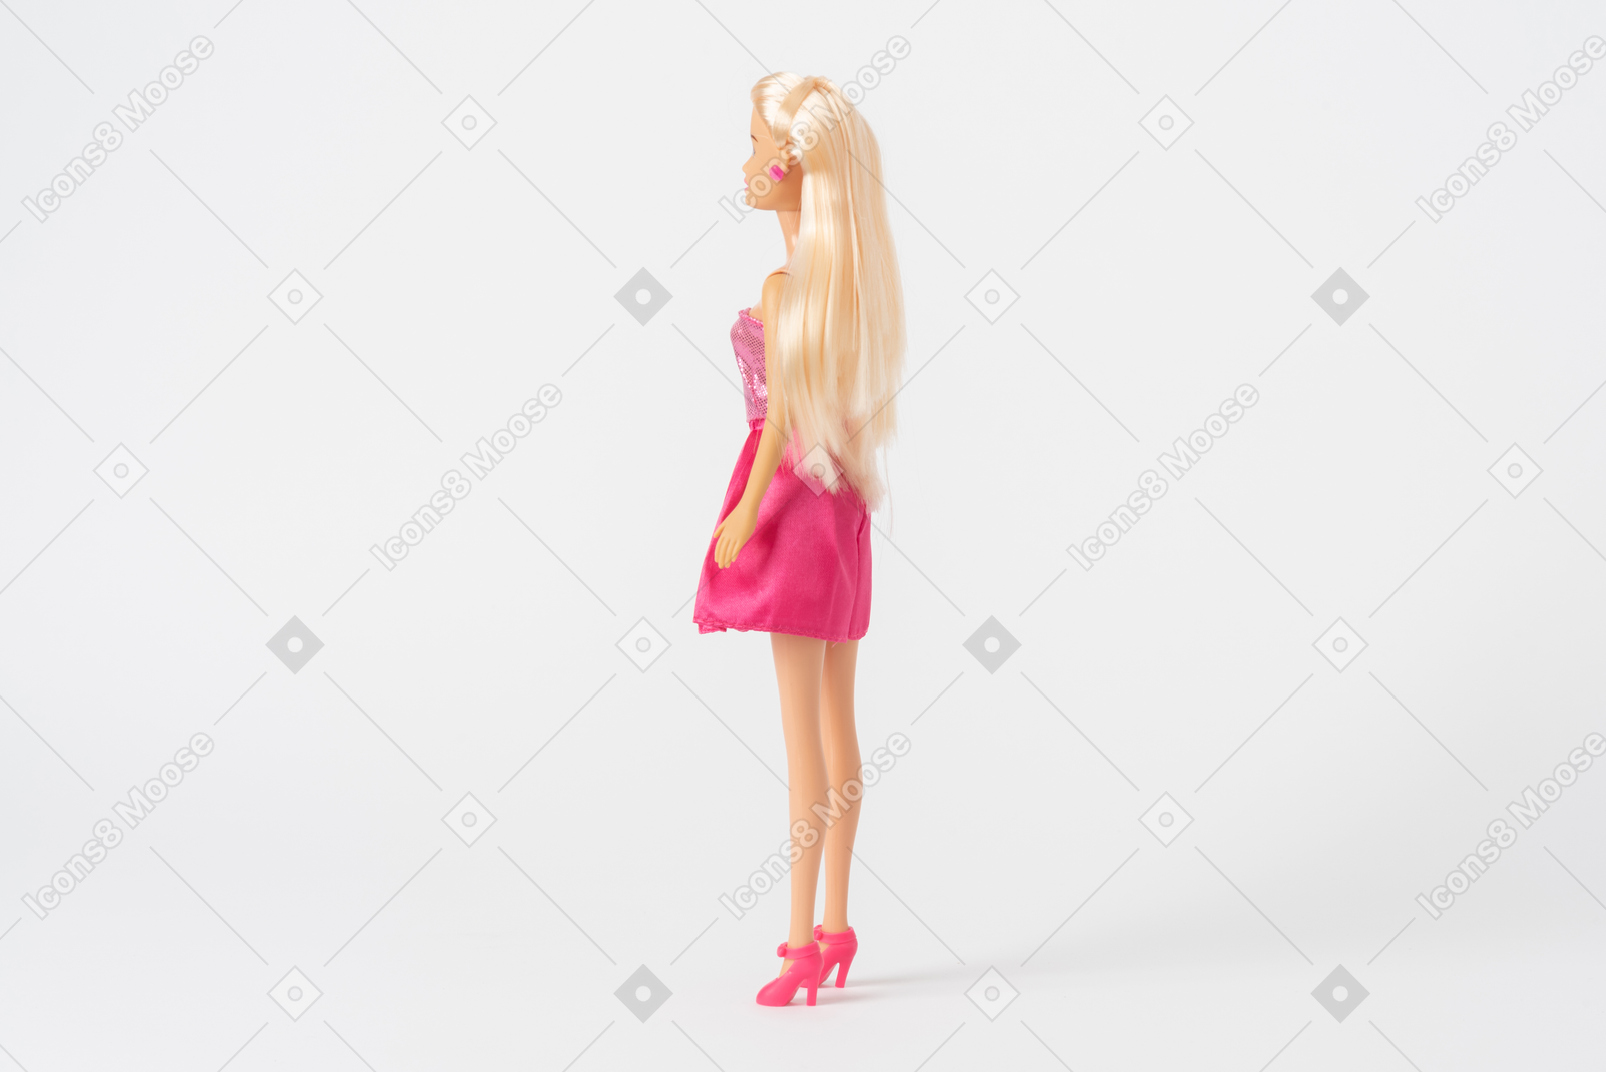 A side shot of a barbie doll in a shiny pink dress and pink high heels, standing isolated against a plain white background